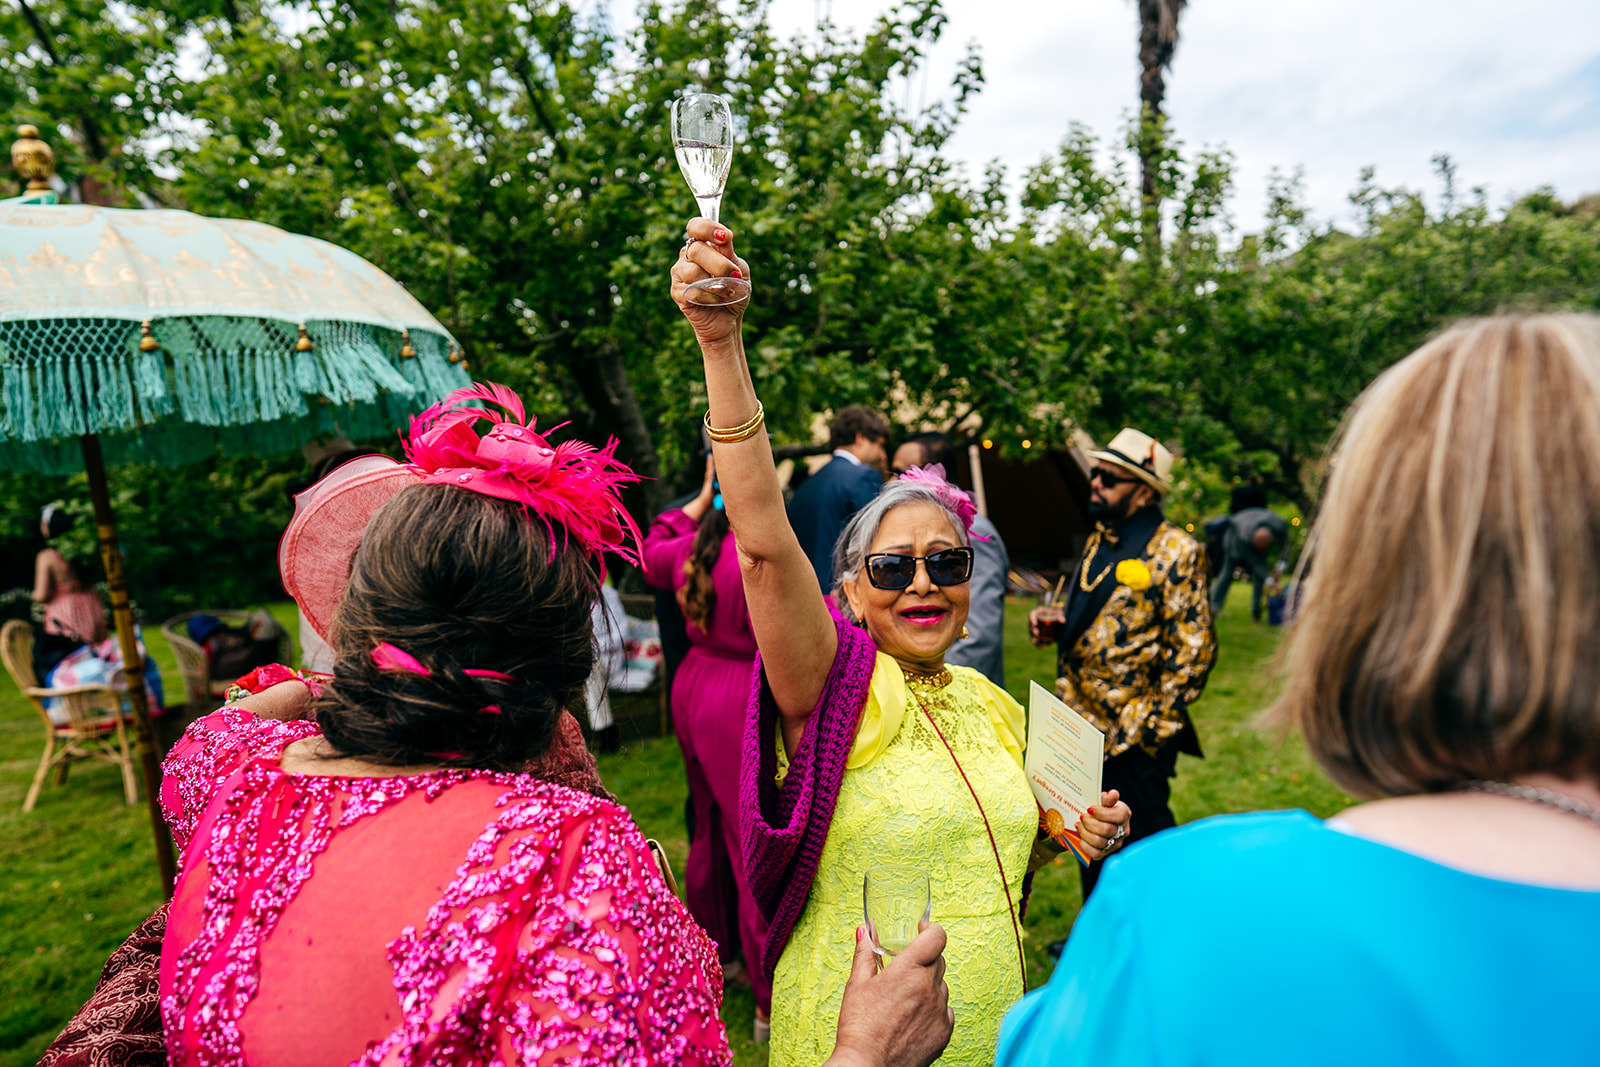 Auntie was the life and soul of this party in her neon yellow dress raising her champagne aloft